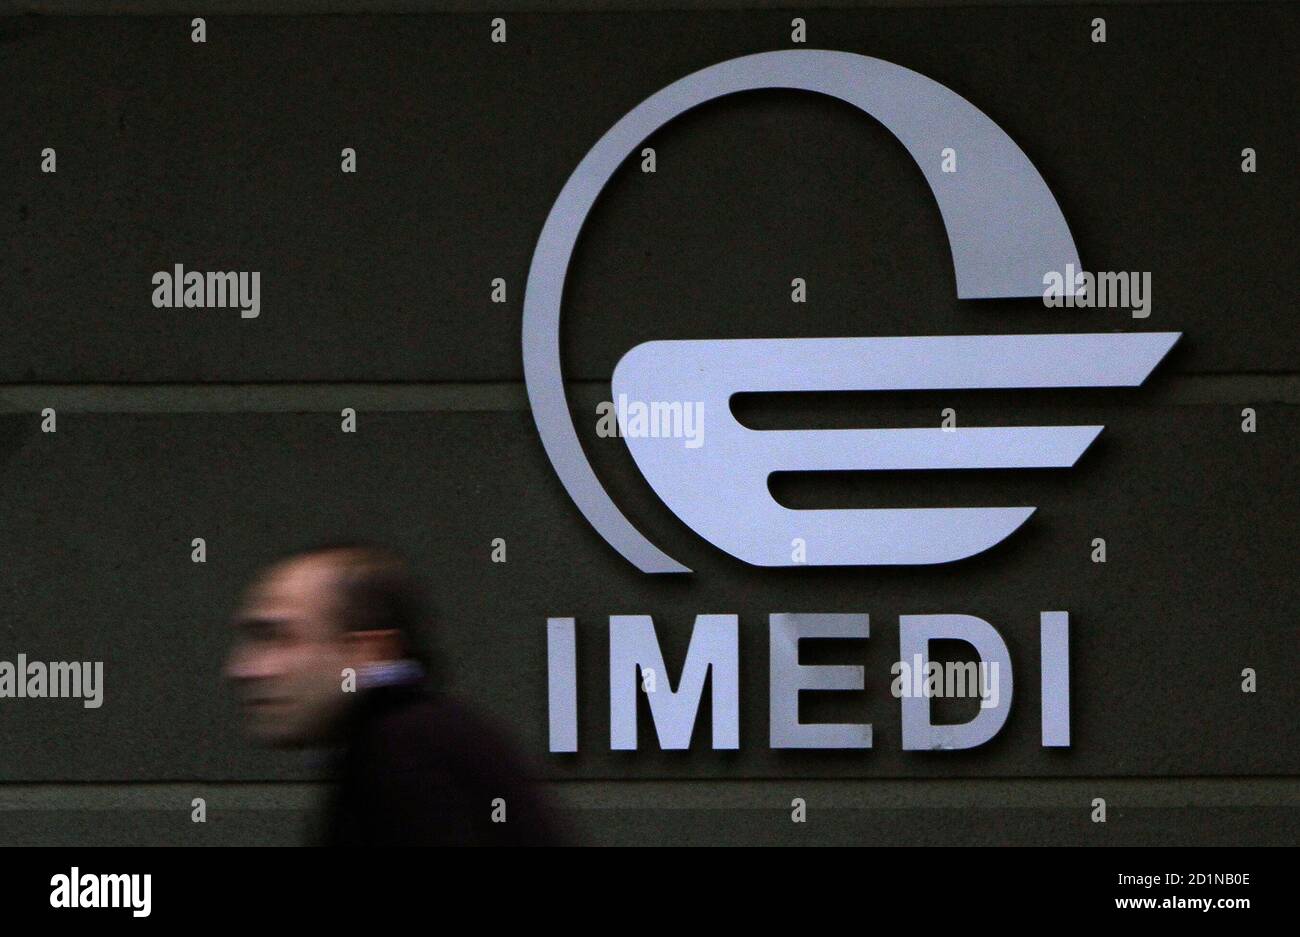 A man passes by a logo of Imedi TV station in Tbilisi March 15, 2010.  Western envoys on Monday condemned a fake news report in Georgia that  Russian tanks had entered the